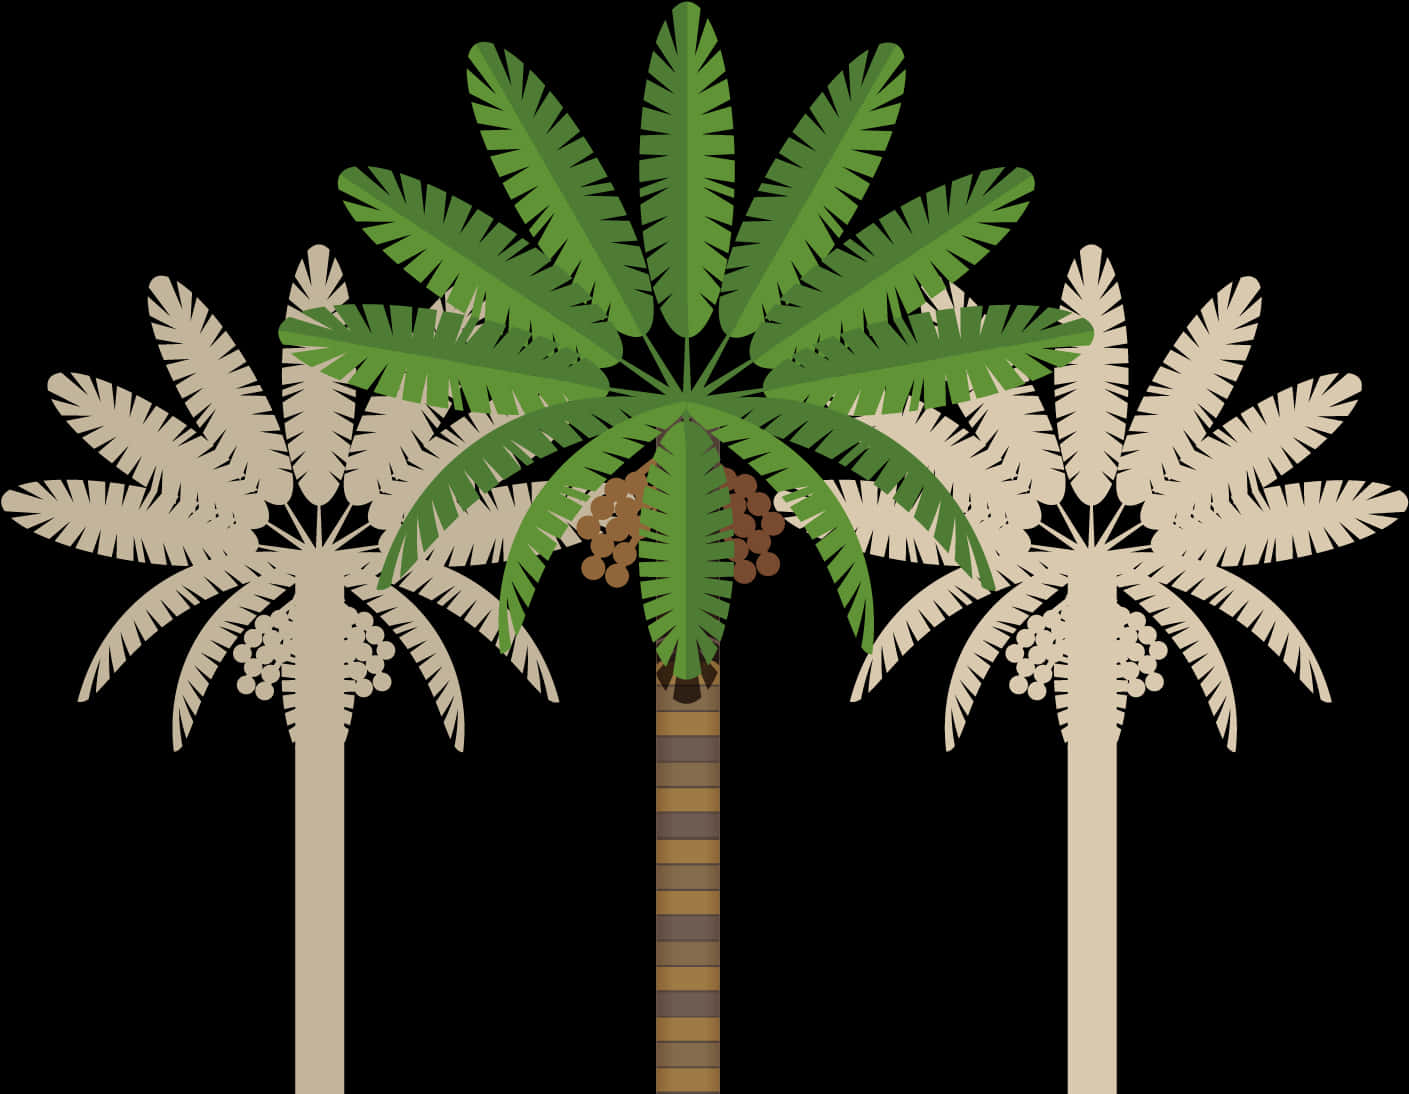 Stylized Coconut Trees Illustration PNG image